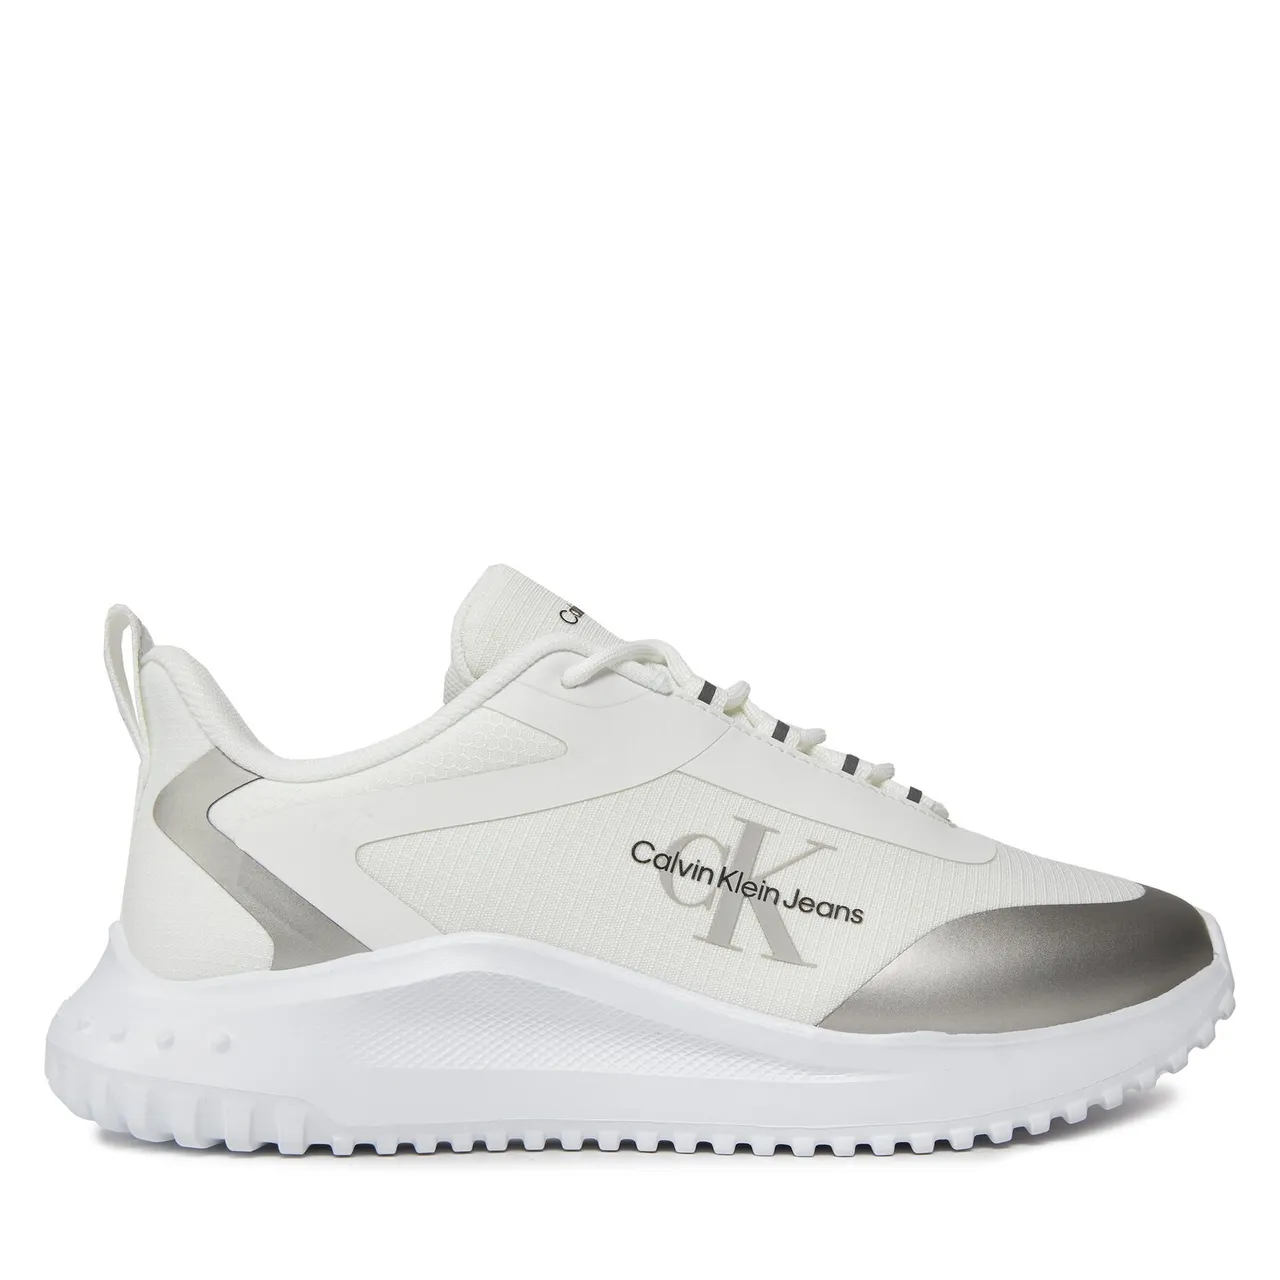 Sneakers Calvin Klein Jeans YW0YW01442 Bright White/Oyster Mushroom 01V